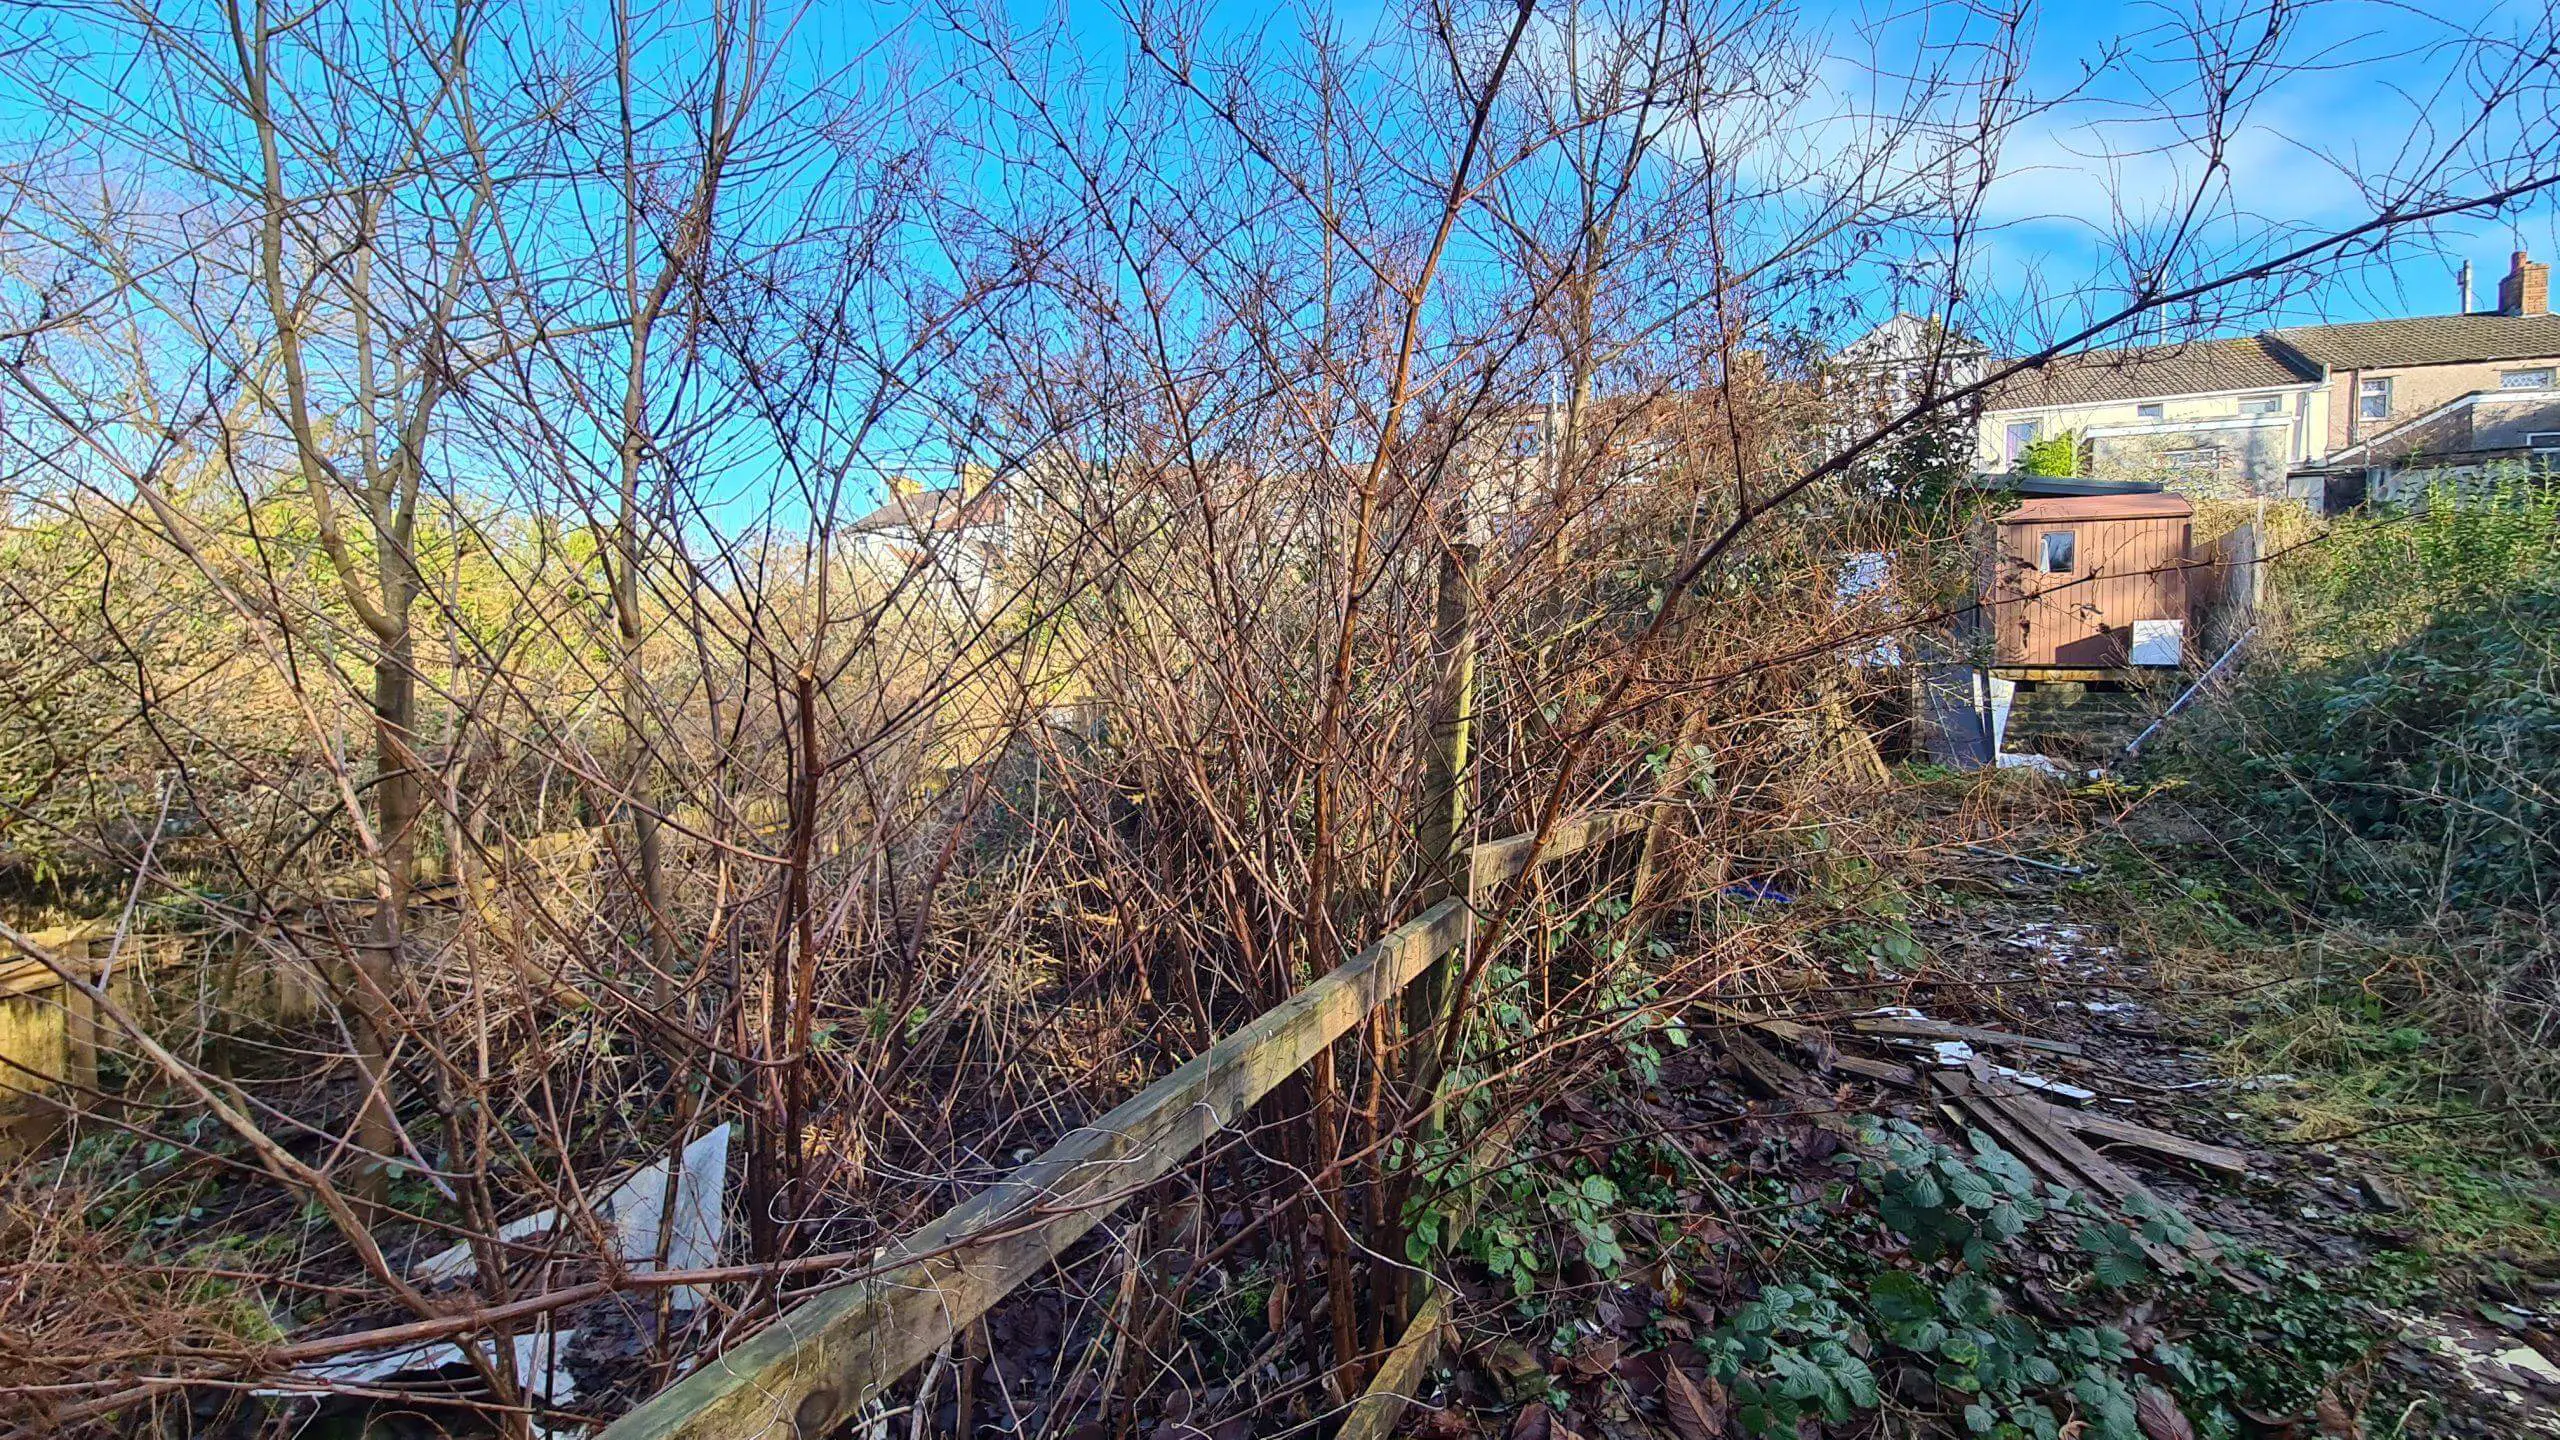 The dead stems of Japanese knotweed spreading between two properties